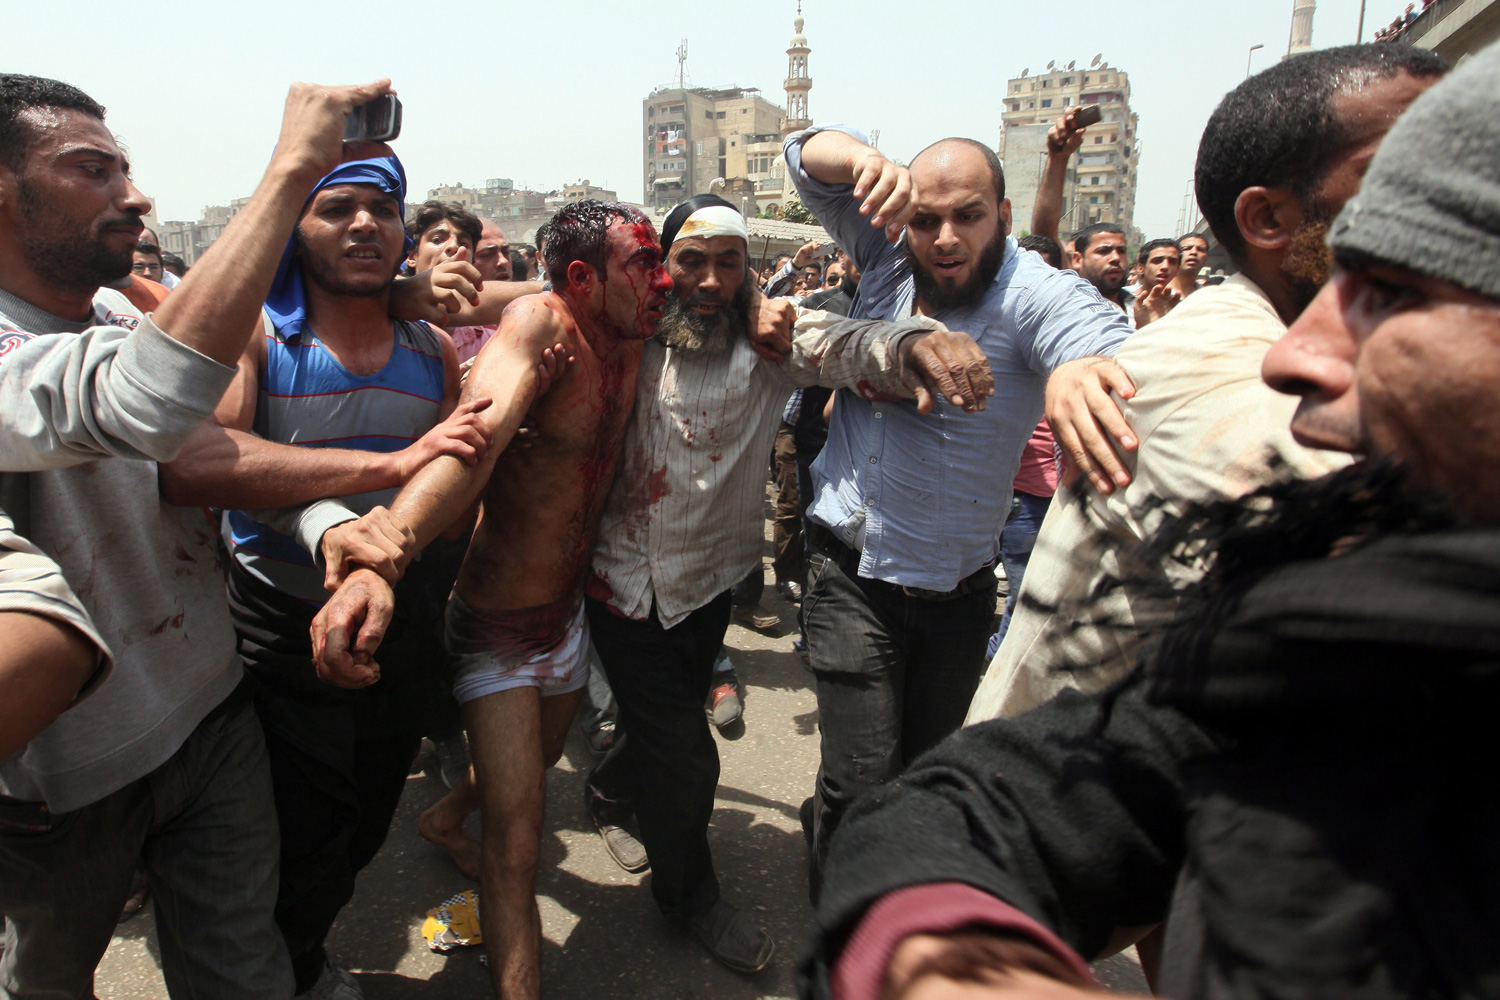 May 2, 2012. Egyptian anti-military protesters arrest one of the rioters who attacked them, during clashes at Abbassiya Square, Cairo.